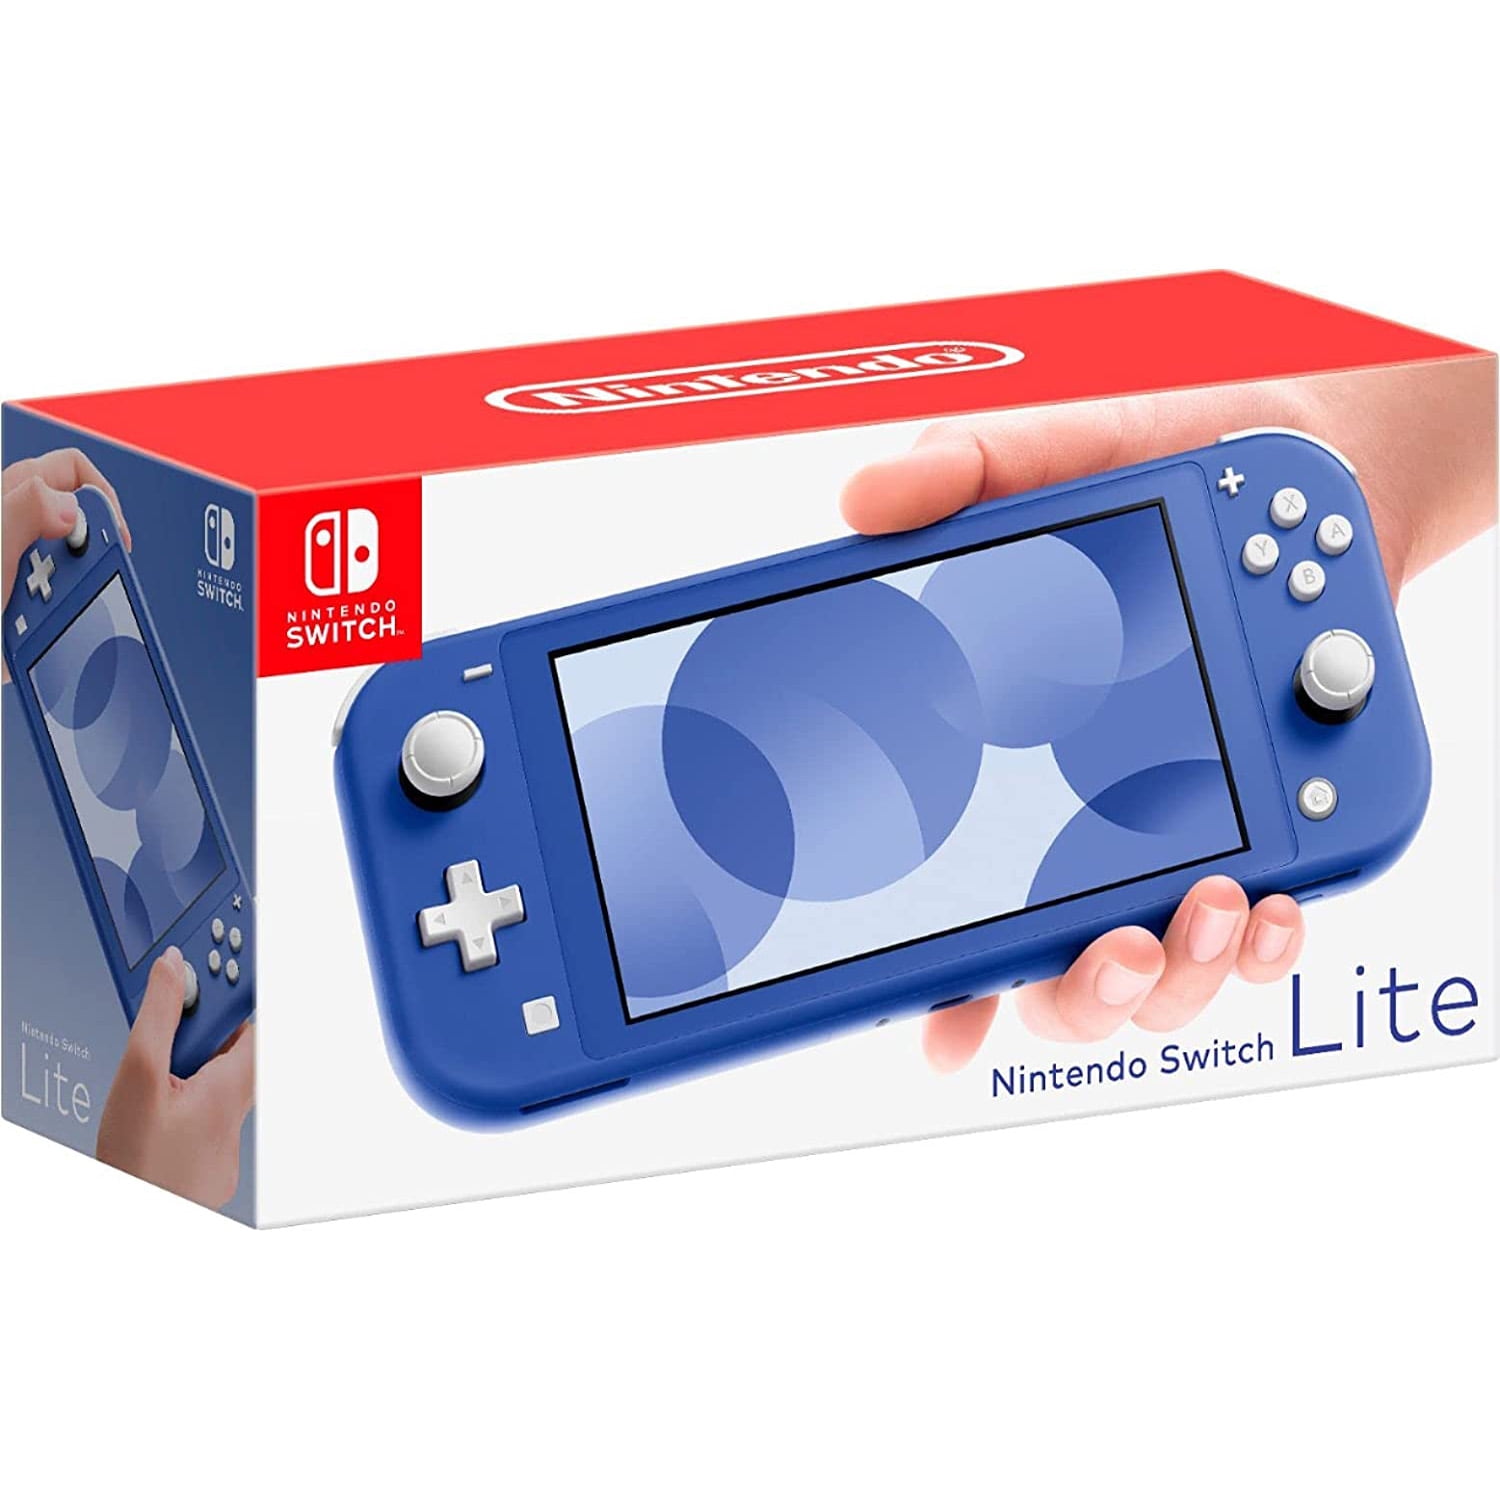 Nintendo Switch Lite (Blue) Gaming Console Bundle with Pokemon 